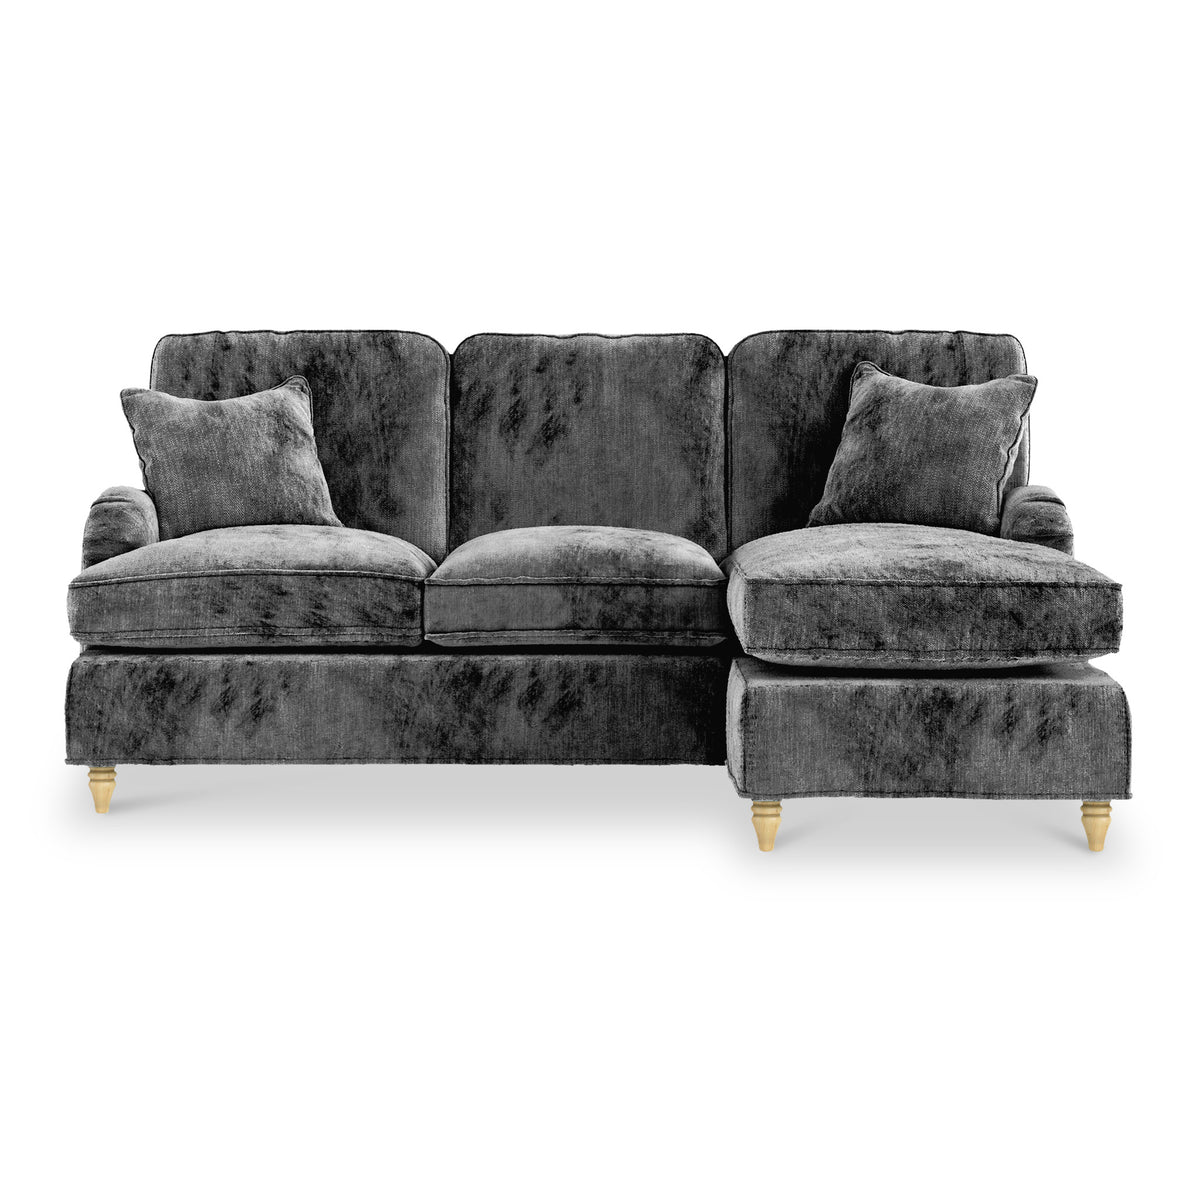 Arthur Charcoal RH Chaise Sofa from Roseland Furniture